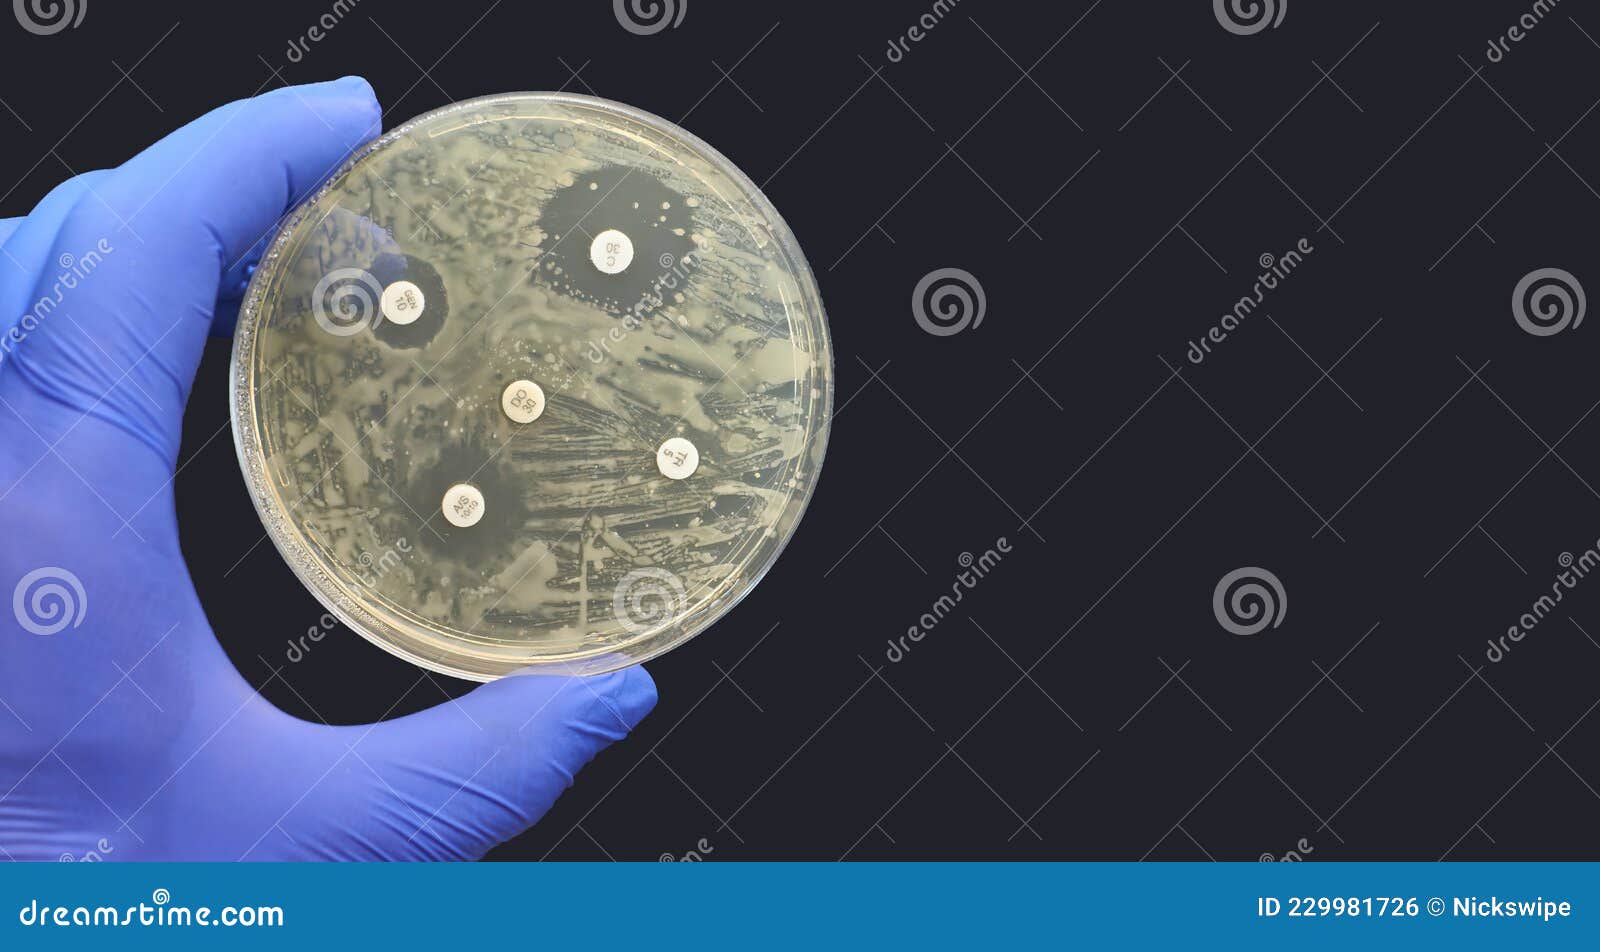 Kirby-Bauer Disk Diffusion Antimicrobial Susceptibility Test Black  Background Stock Photo - Image of resistance, healthcare: 229981726